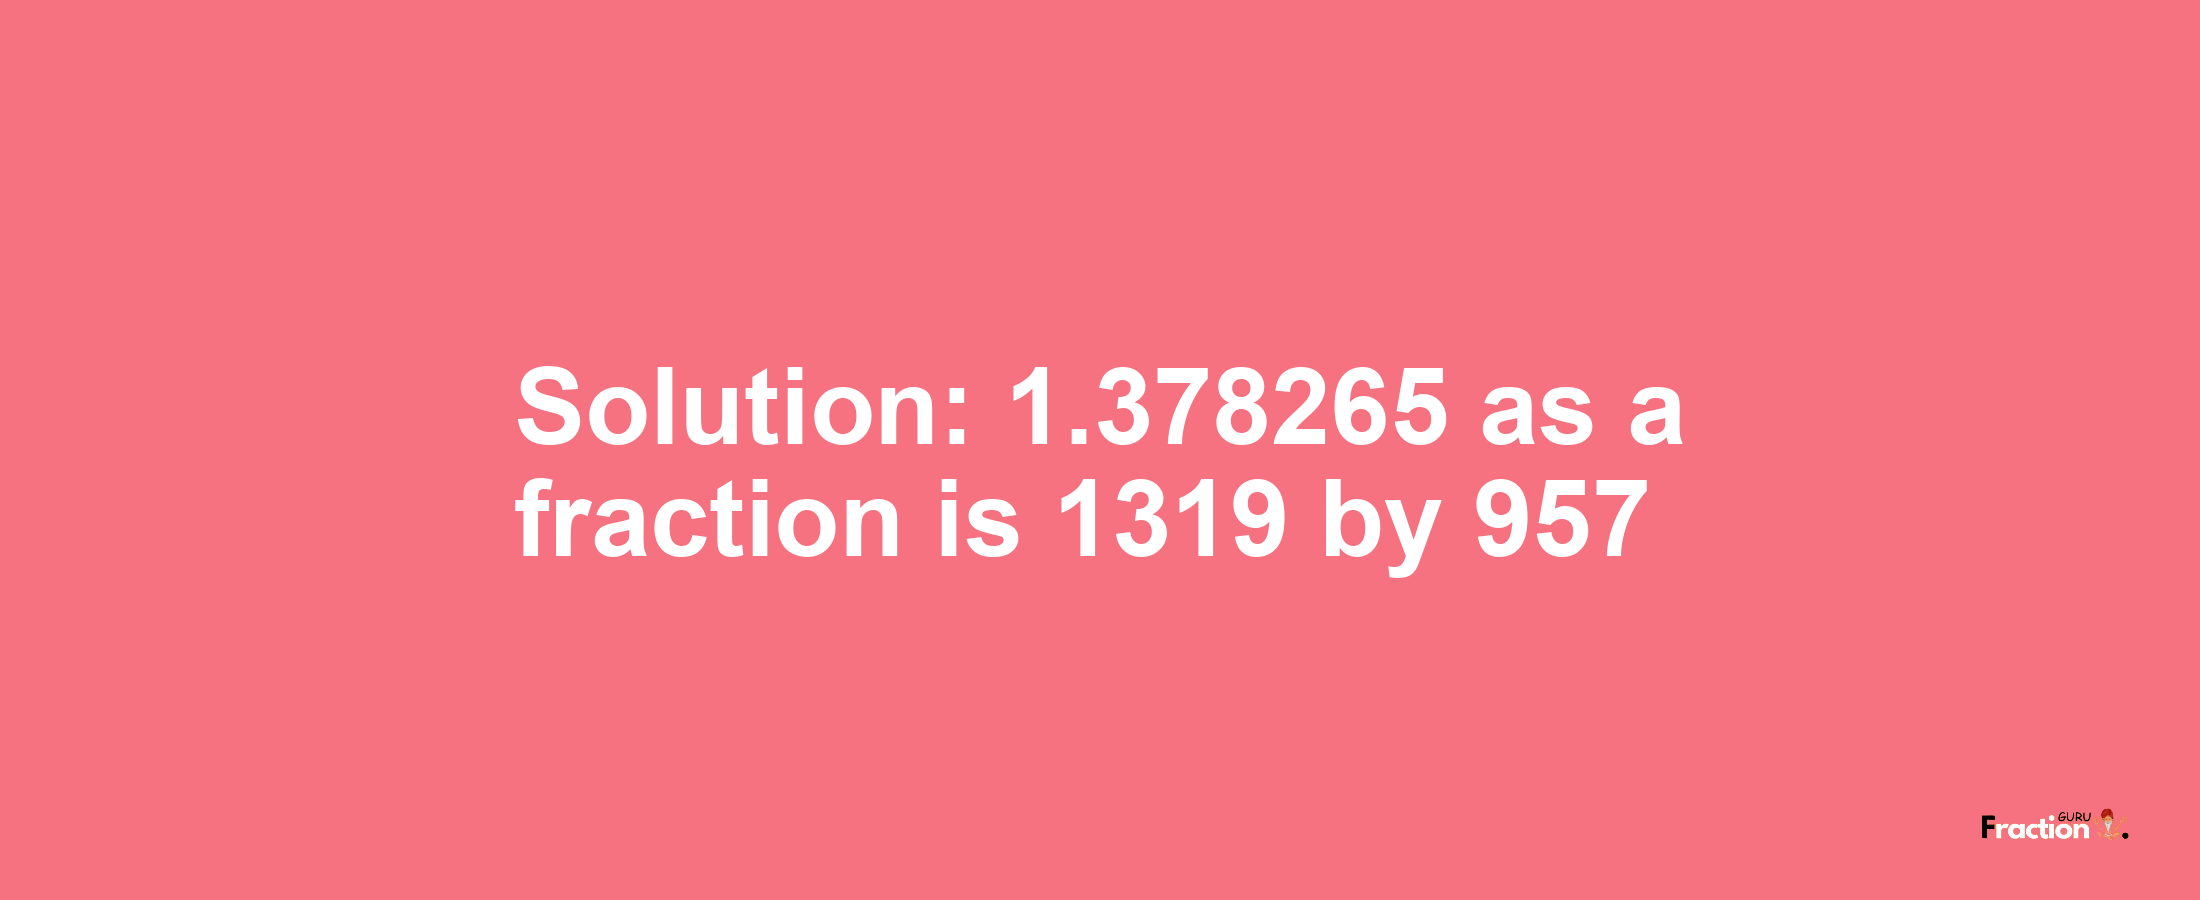 Solution:1.378265 as a fraction is 1319/957